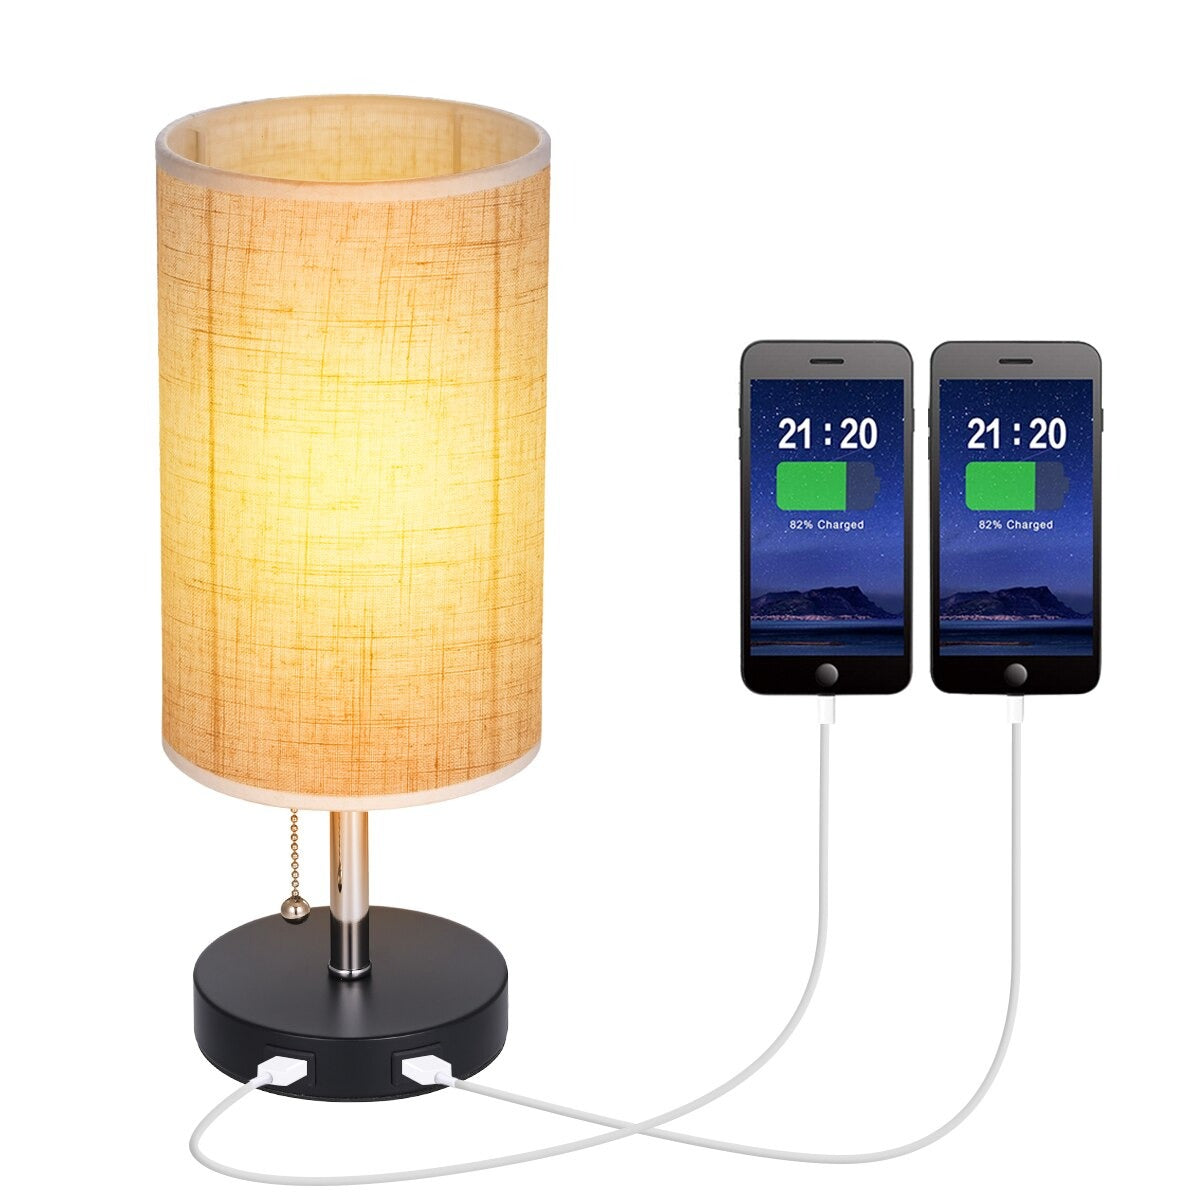 Scandinavian style bedside lamp with charger